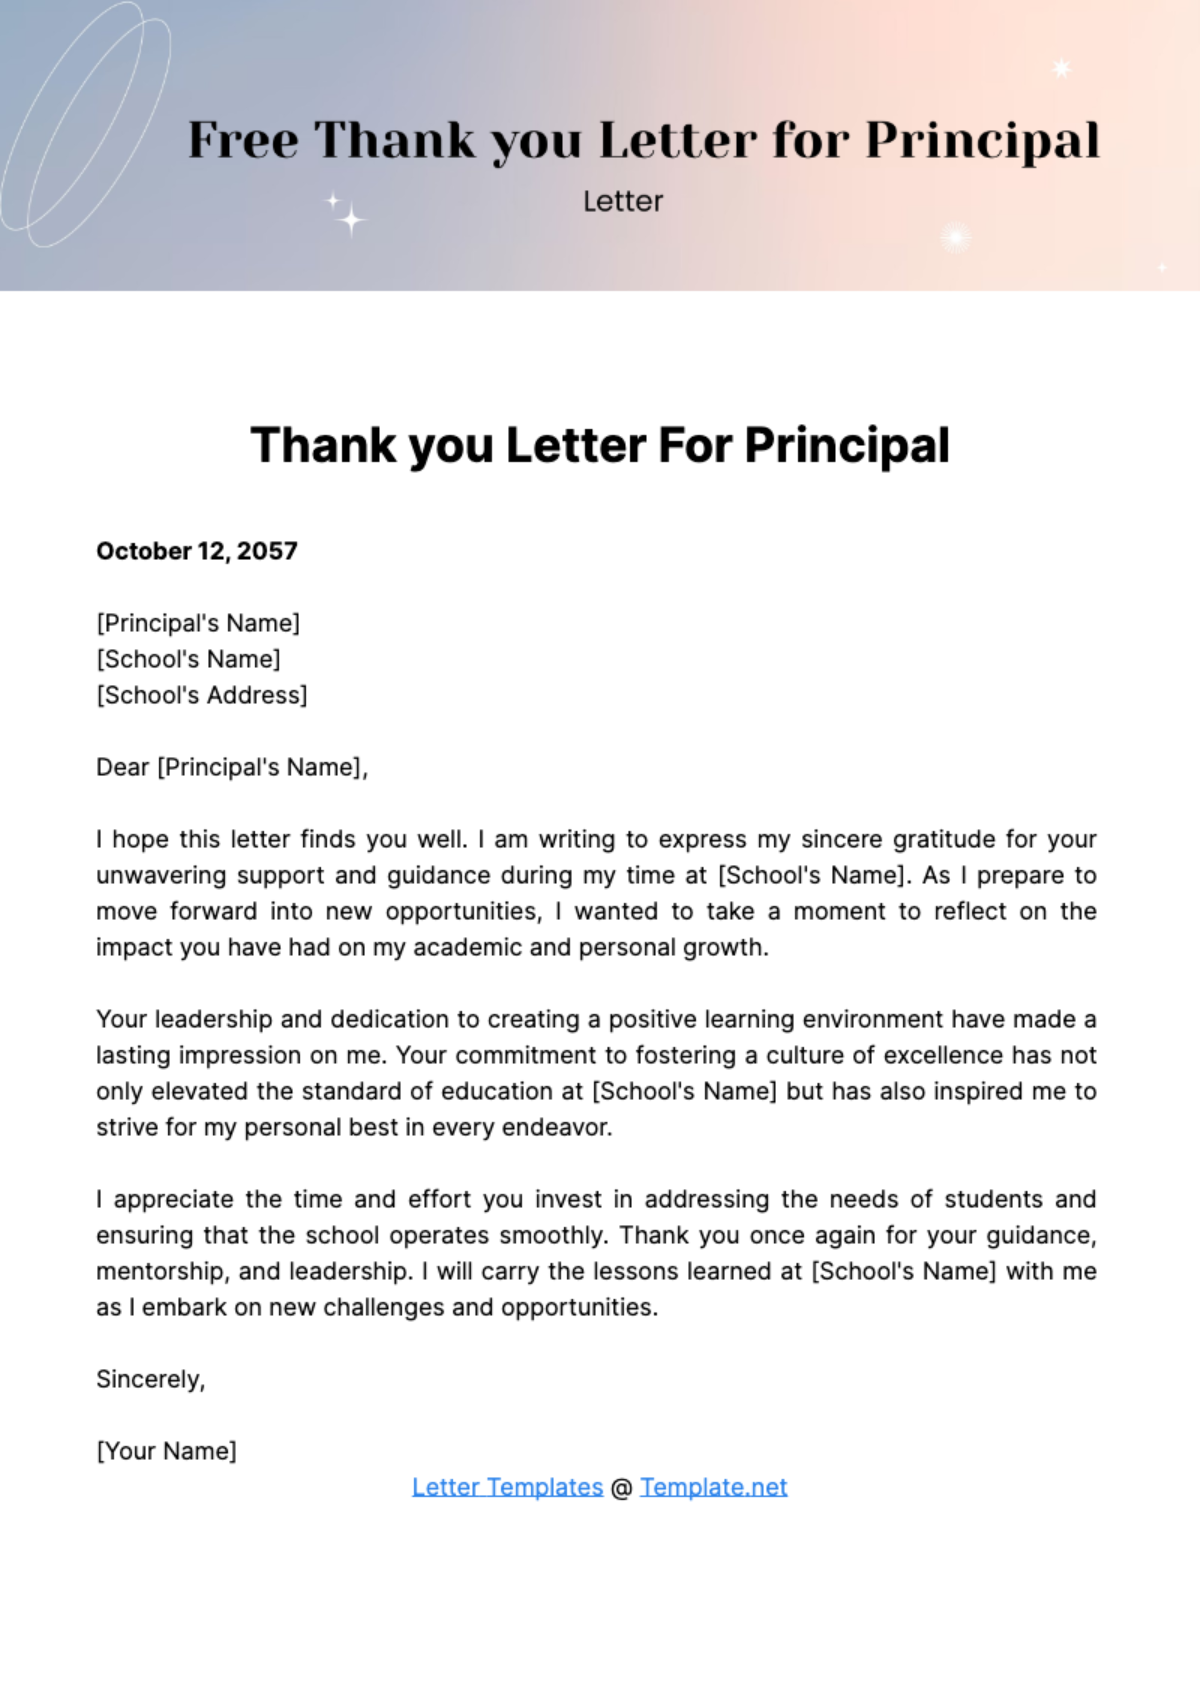 Free Thank you Letter for Principal Template